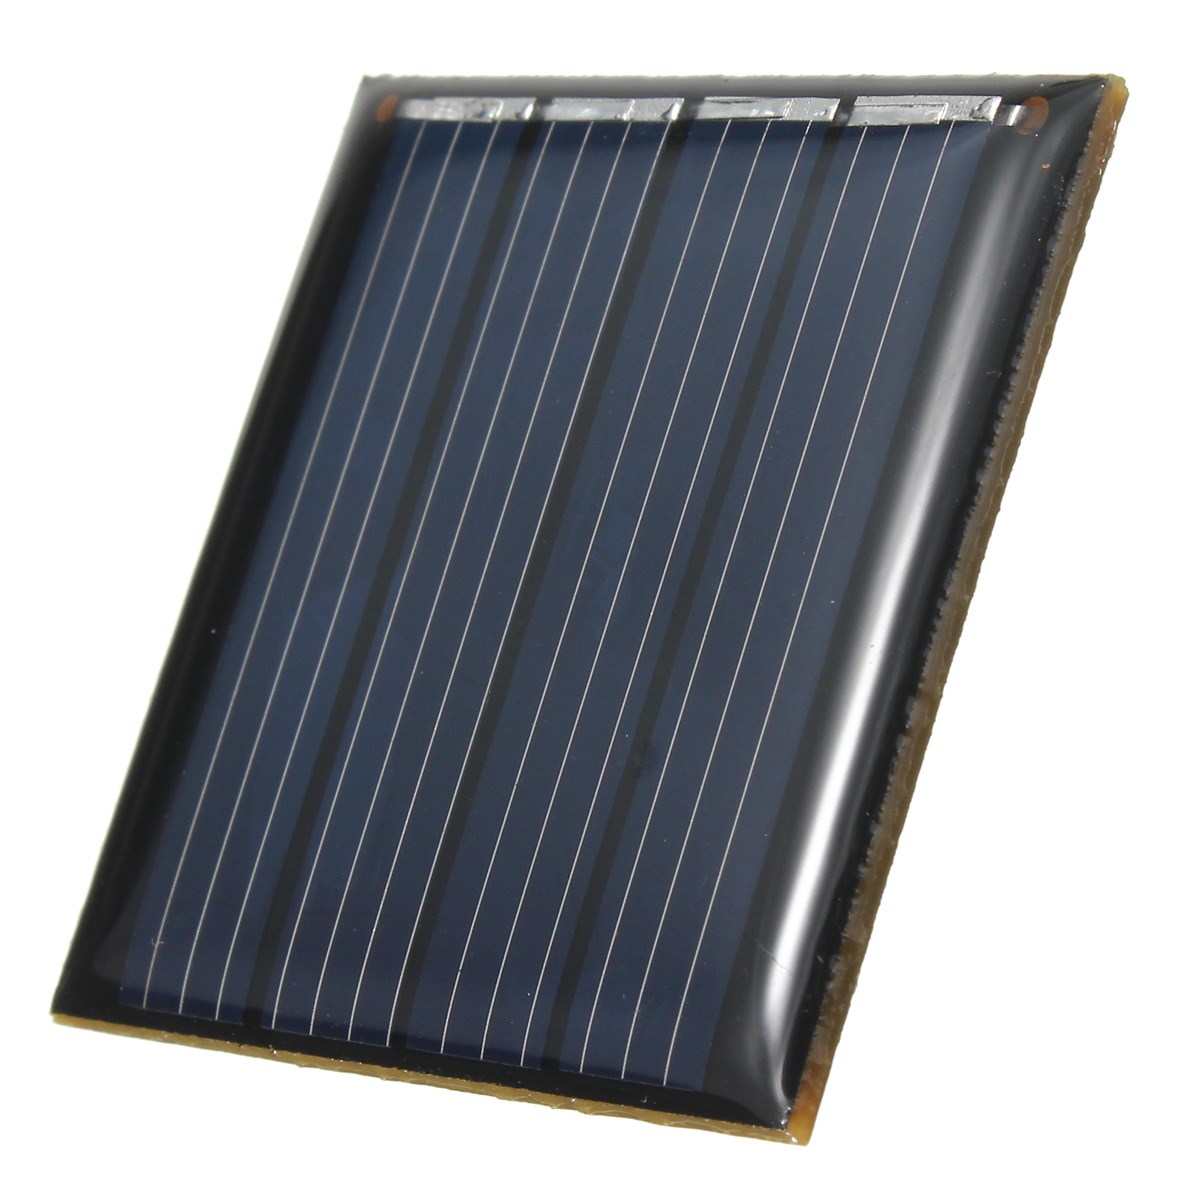 2V 0.14W Epoxy Battery Plate Polycrystalline Silicon Cell Batteries DIY Solar Powered Panels Solar Panel Cell Model 40 x 40x3mm 8